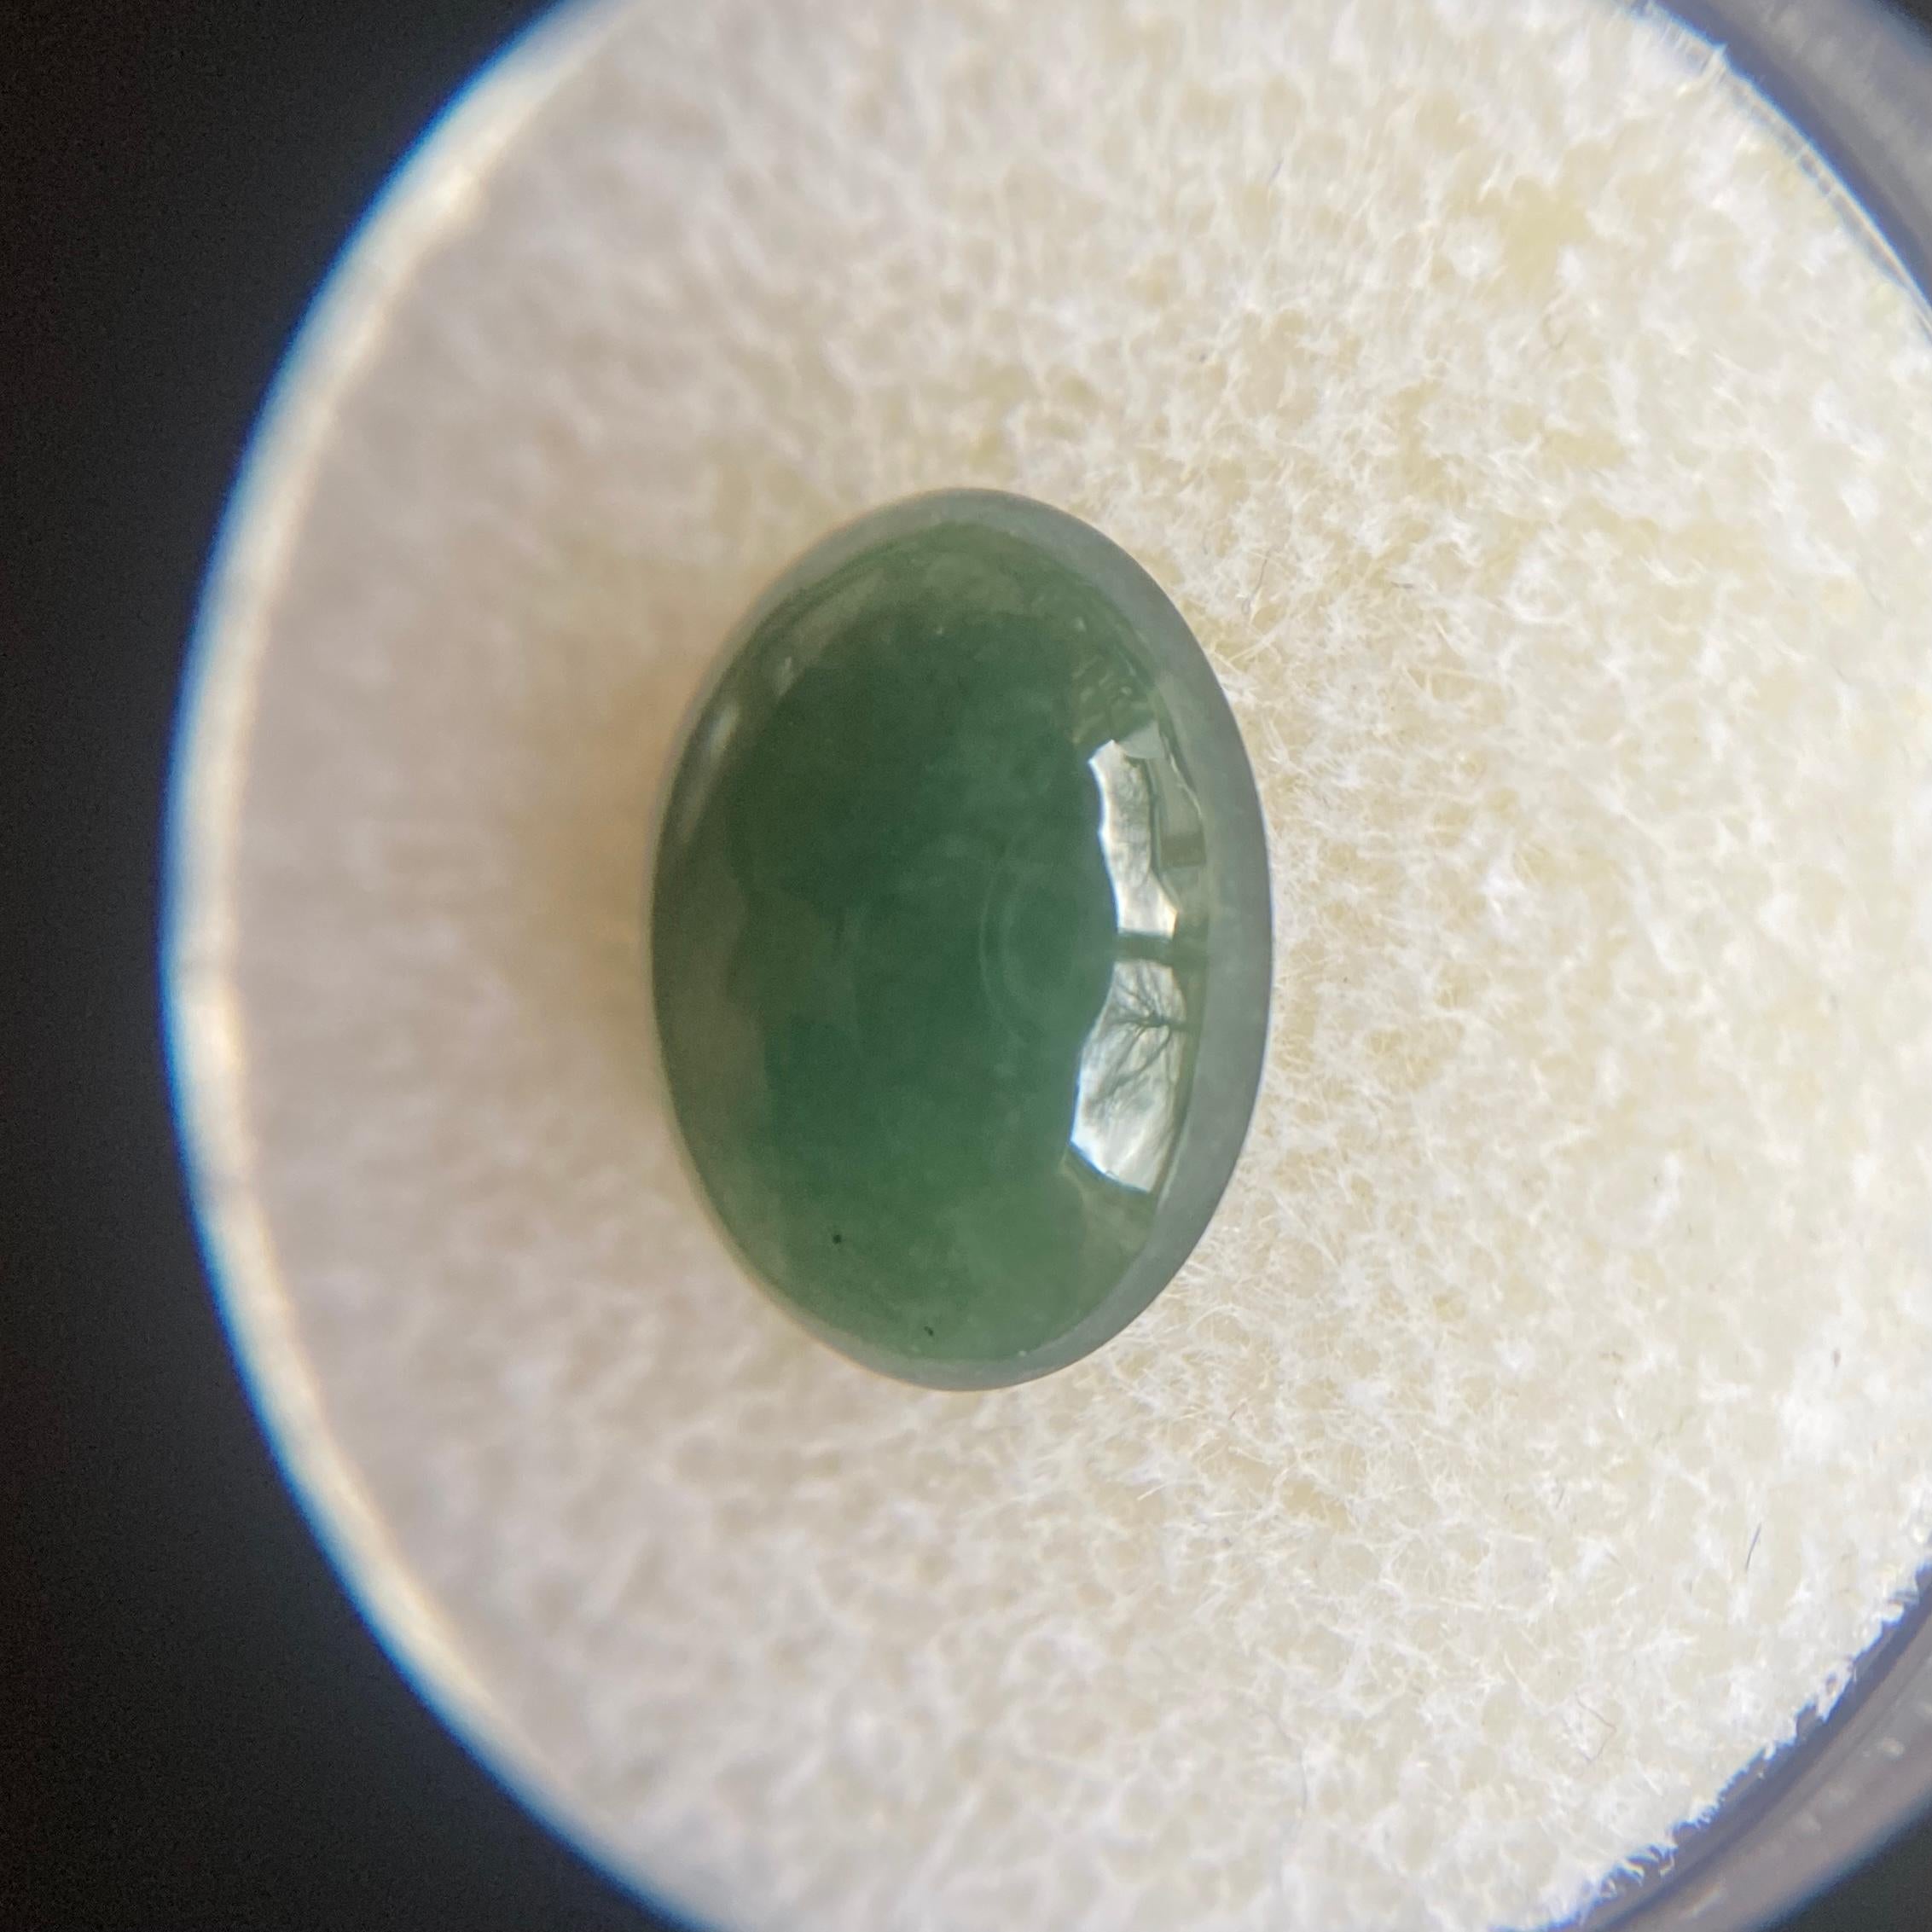 GIA Certified Untreated Jadeite Gemstone.

3.38 Carat with an excellent oval cabochon cut. Fully certified by GIA, one of the best and most well equipped gem labs.

Totally Untreated Jadeite jade, referred to as ‘A’ grade in the trade. Mined in